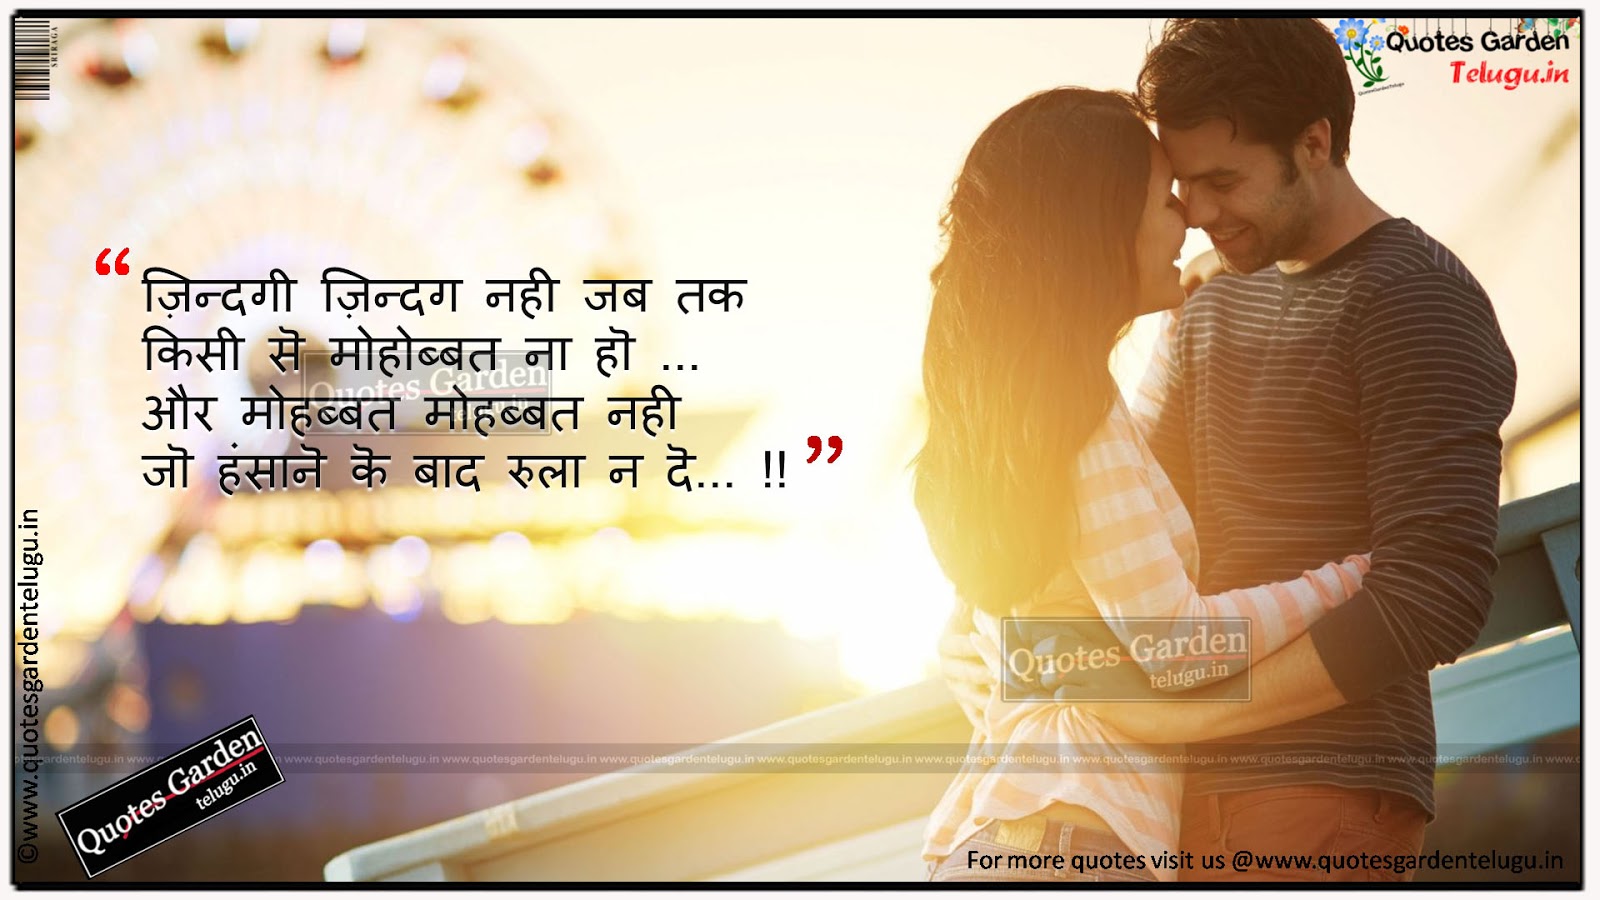 42 quotes in hindi best hindi love quotes new latest love quotes in hindi